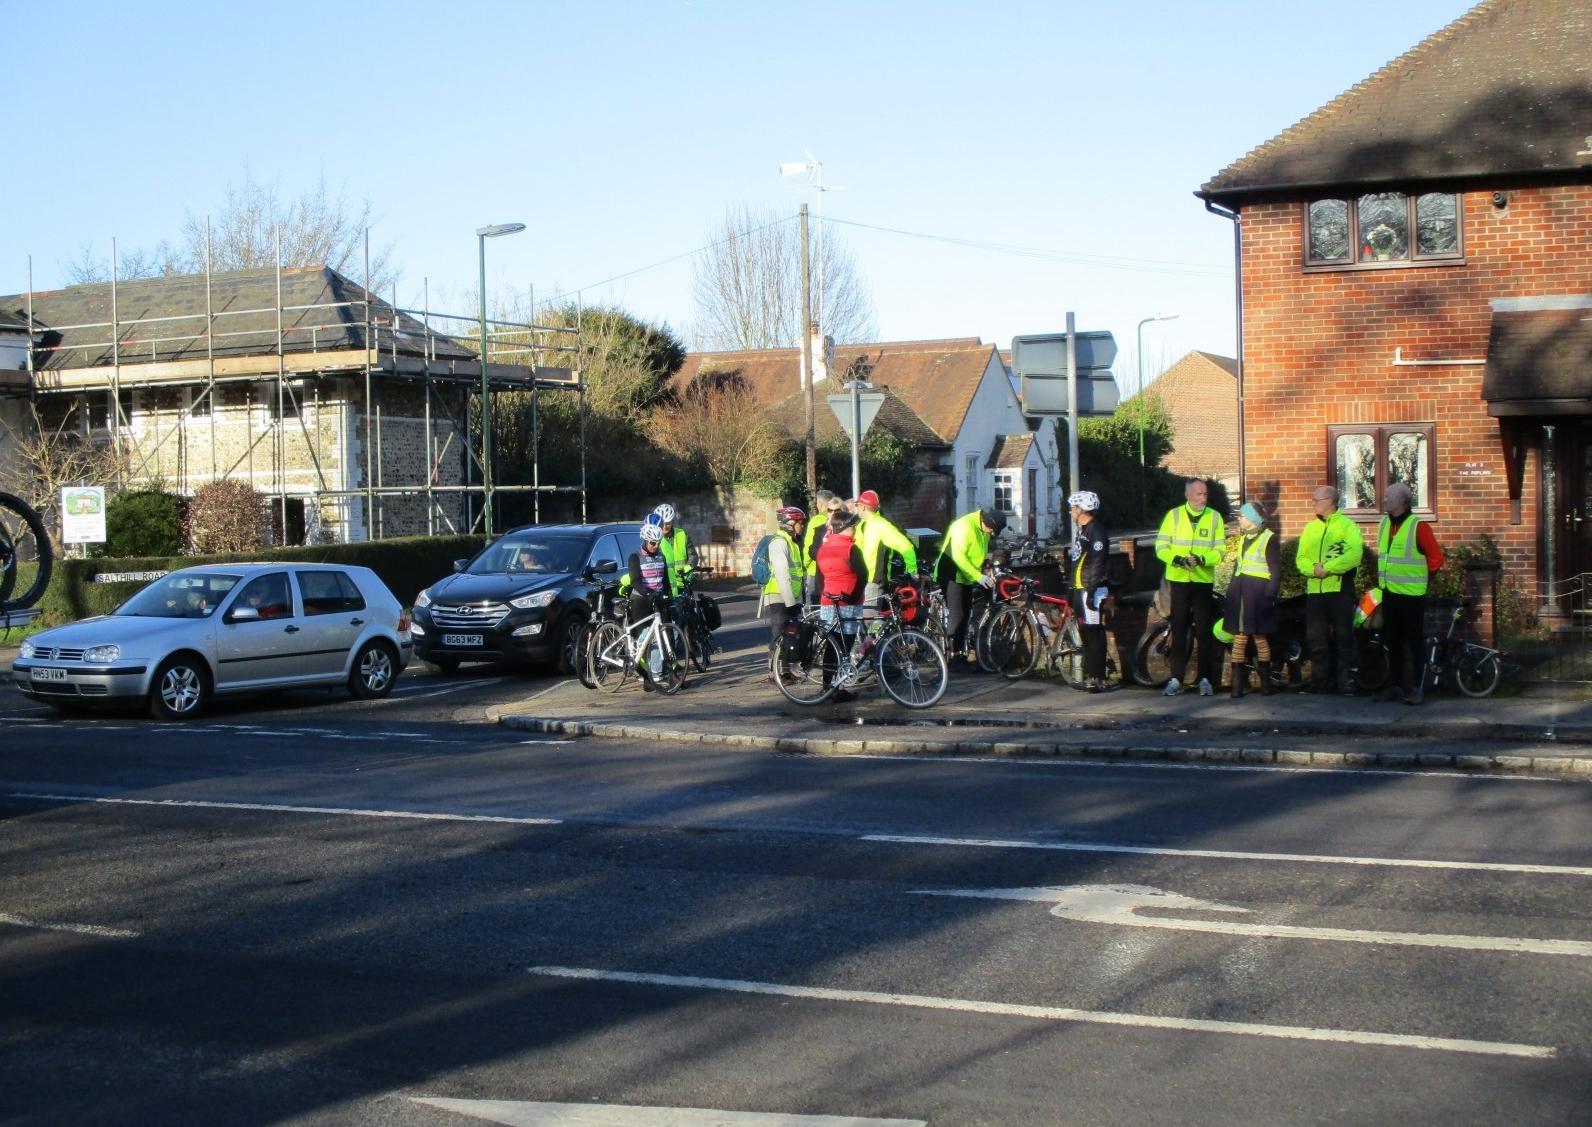 Following the death of well-known Bosham cyclist Gina McWilliam, a group of campaigners paid their respects and appealed for changes to the ‘inadequate’ road system at a well-attended event on Sunday. SUS-200122-104616001